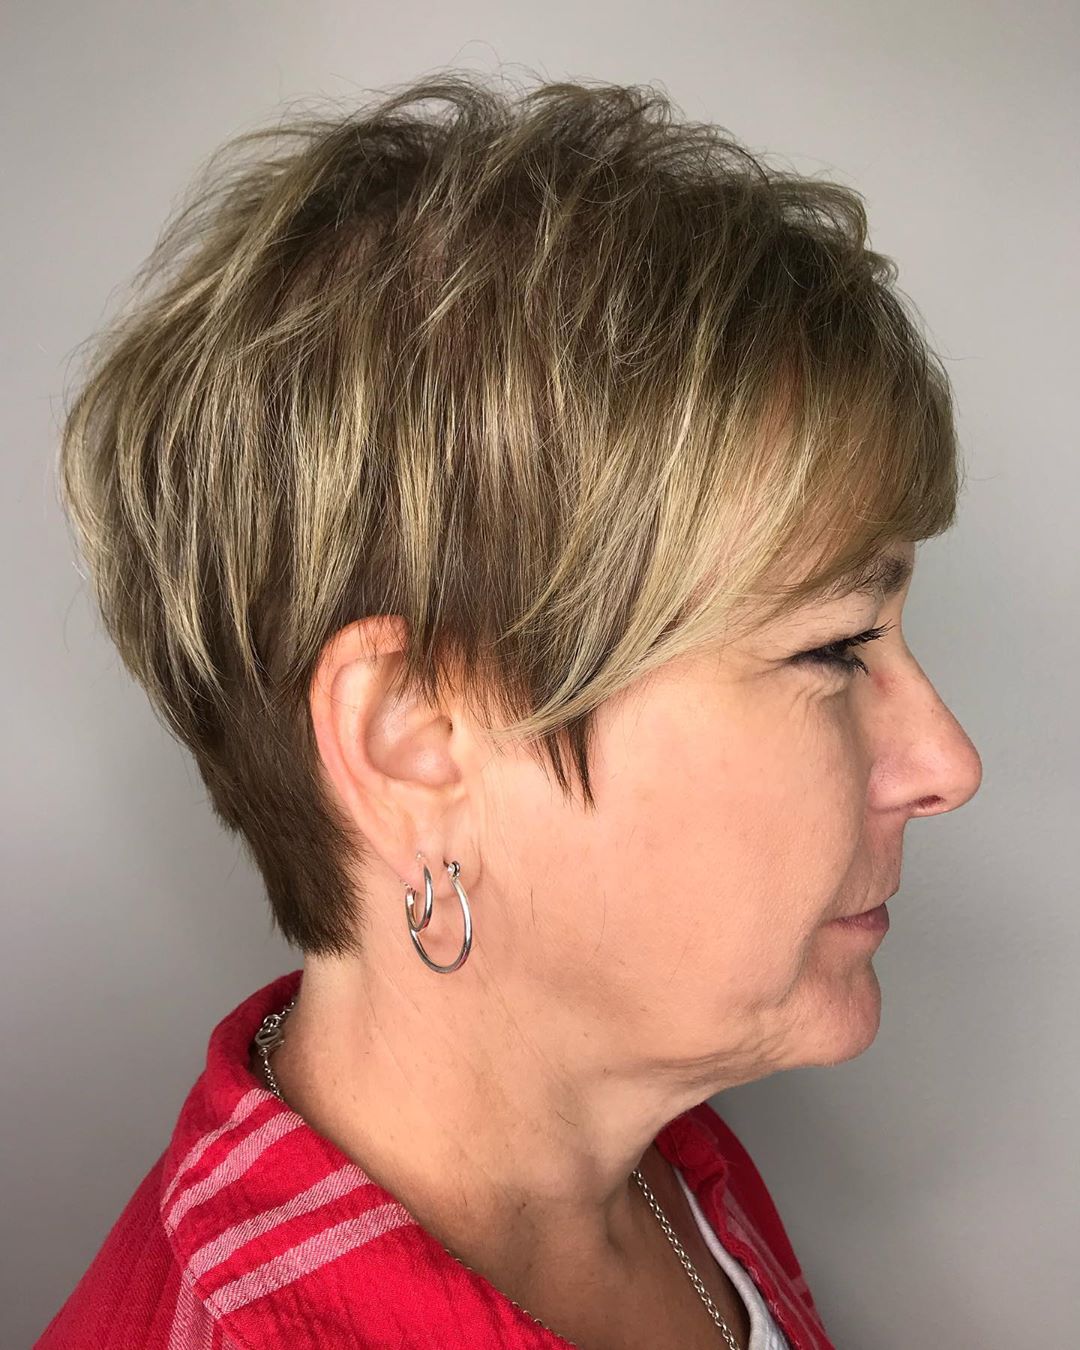 Polished feathered blonde pixie haircut for women over 70